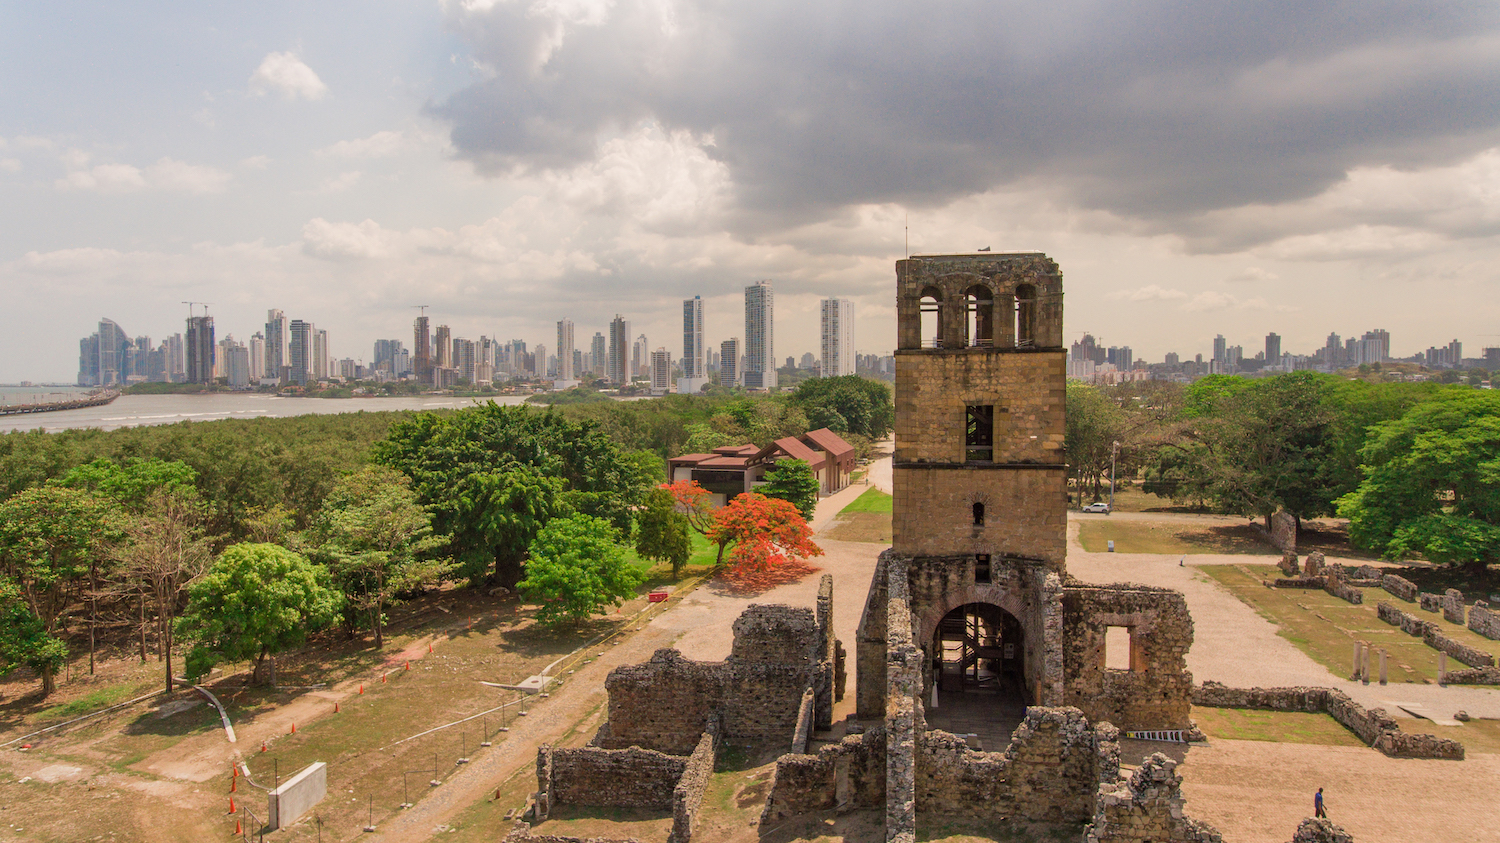 Panama Viejo is part of the Trans-Isthmian Colonial Route 